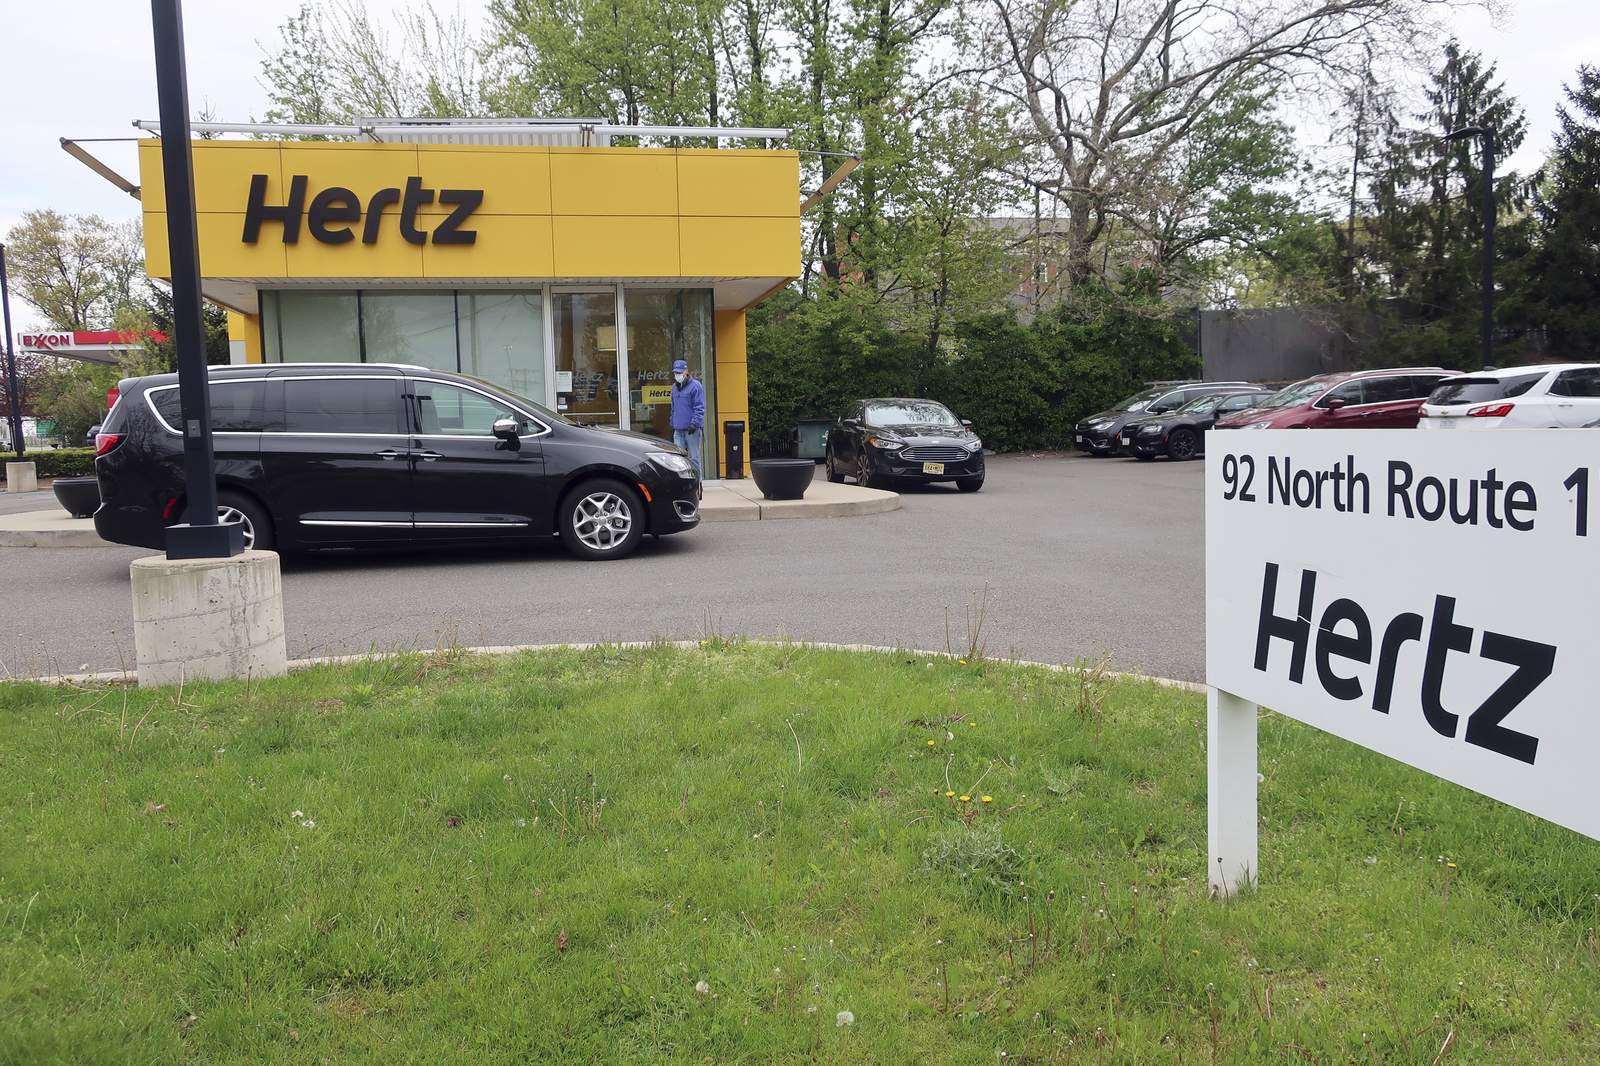 Hertz selling 182K trucks and SUVS under market value after filing for bankruptcy due to coronavirus pandemic